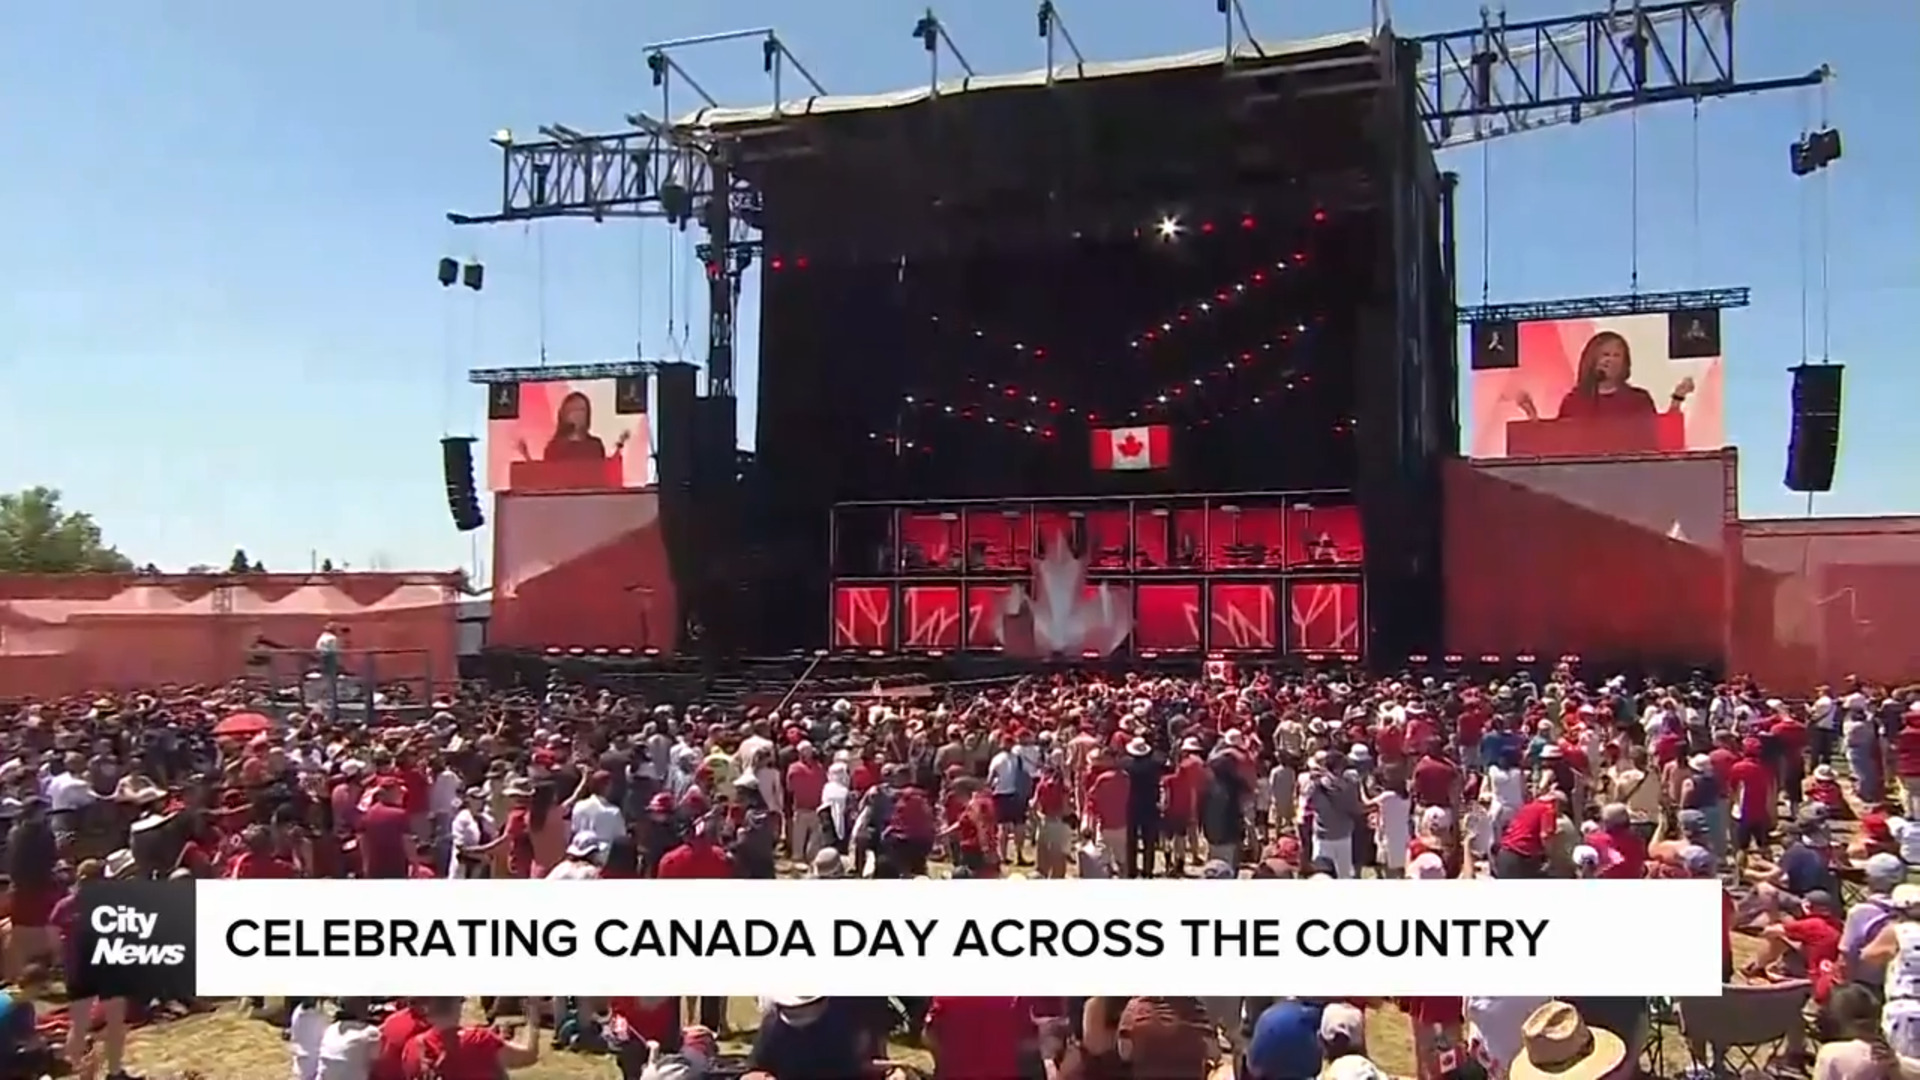 Celebrating Canada Day across the country